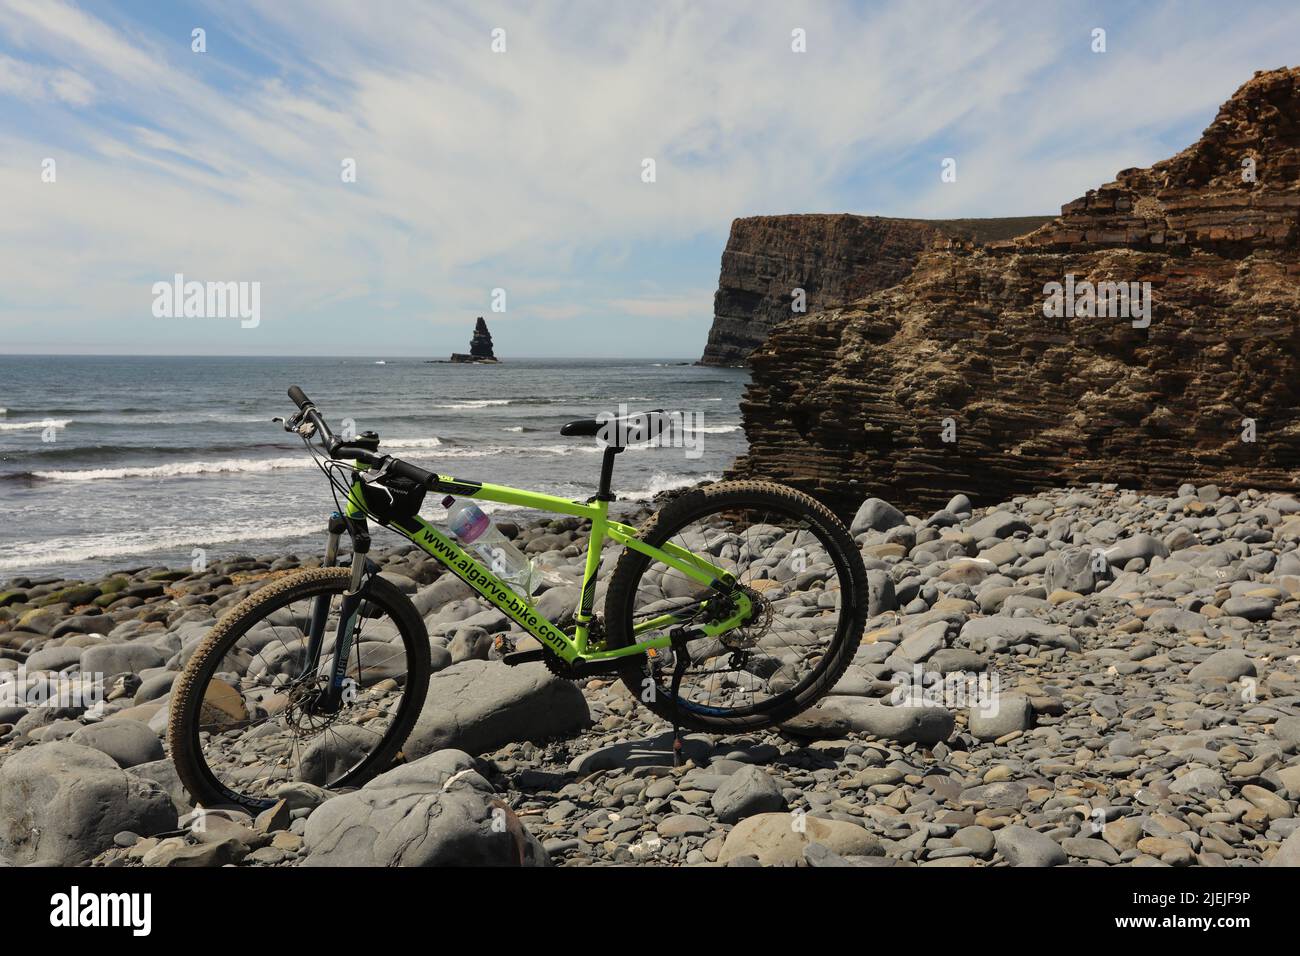 Bike on a stony beach by the sea and cliff in Portugal Stock Photo